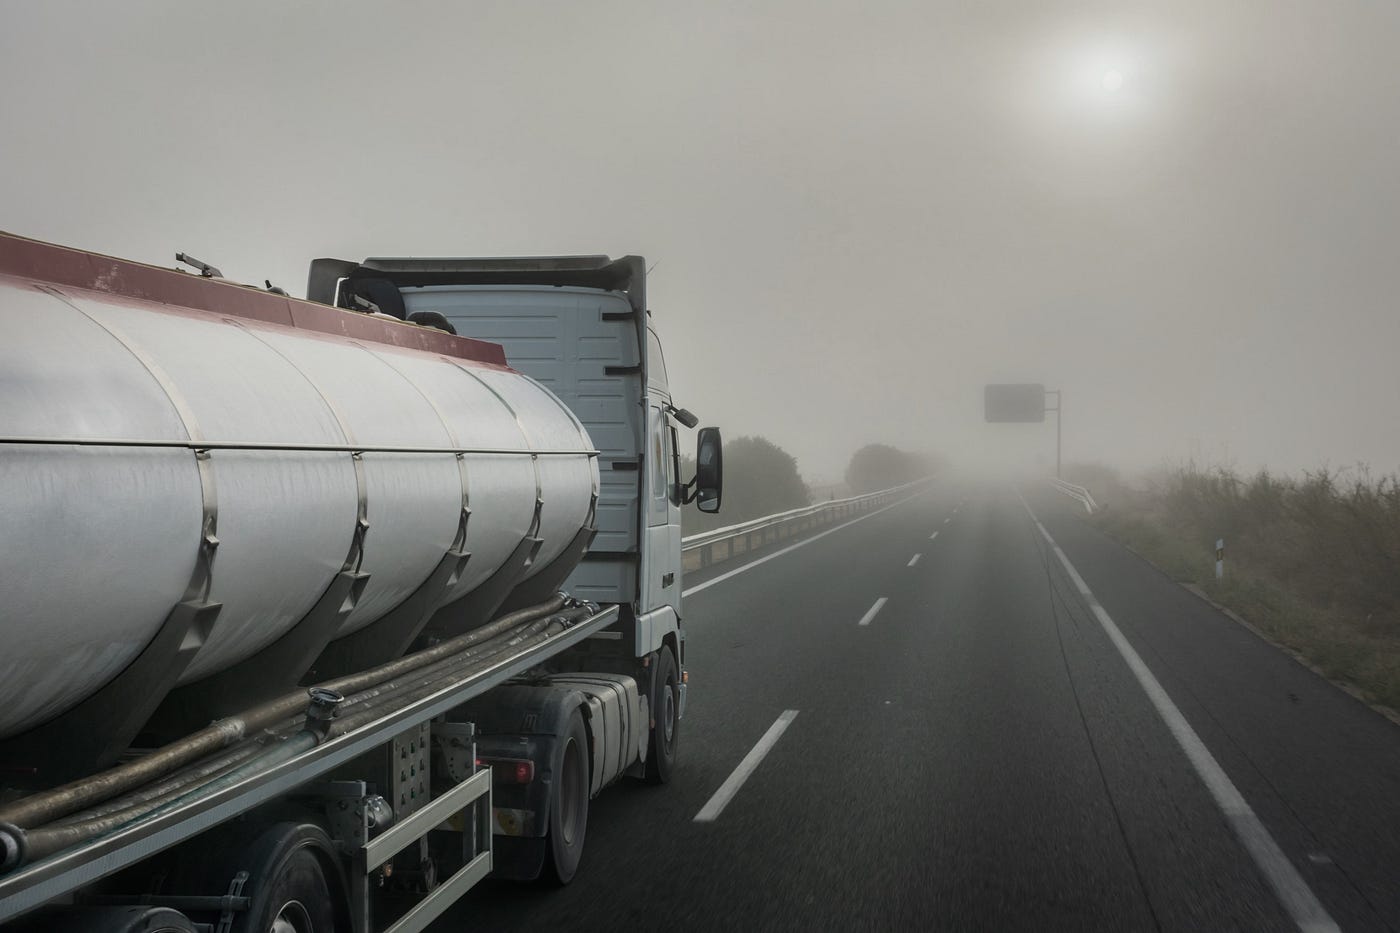 A tanker truck is driving through a foggy road.